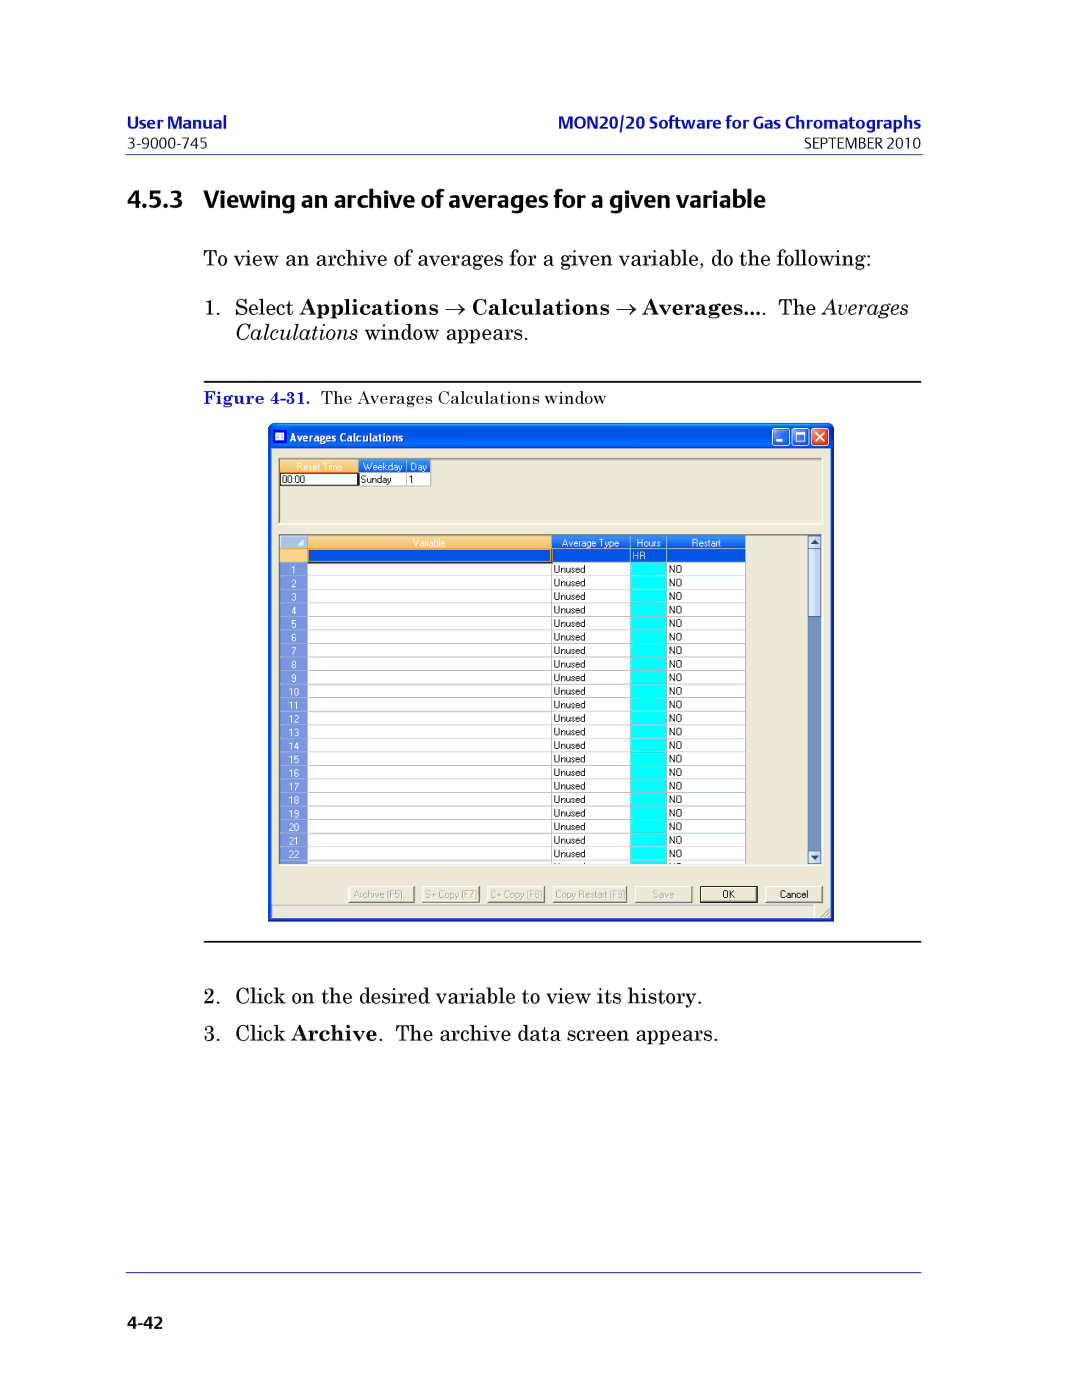 Emerson Process Management 3-9000-745 manual Viewing an archive of averages for a given variable 